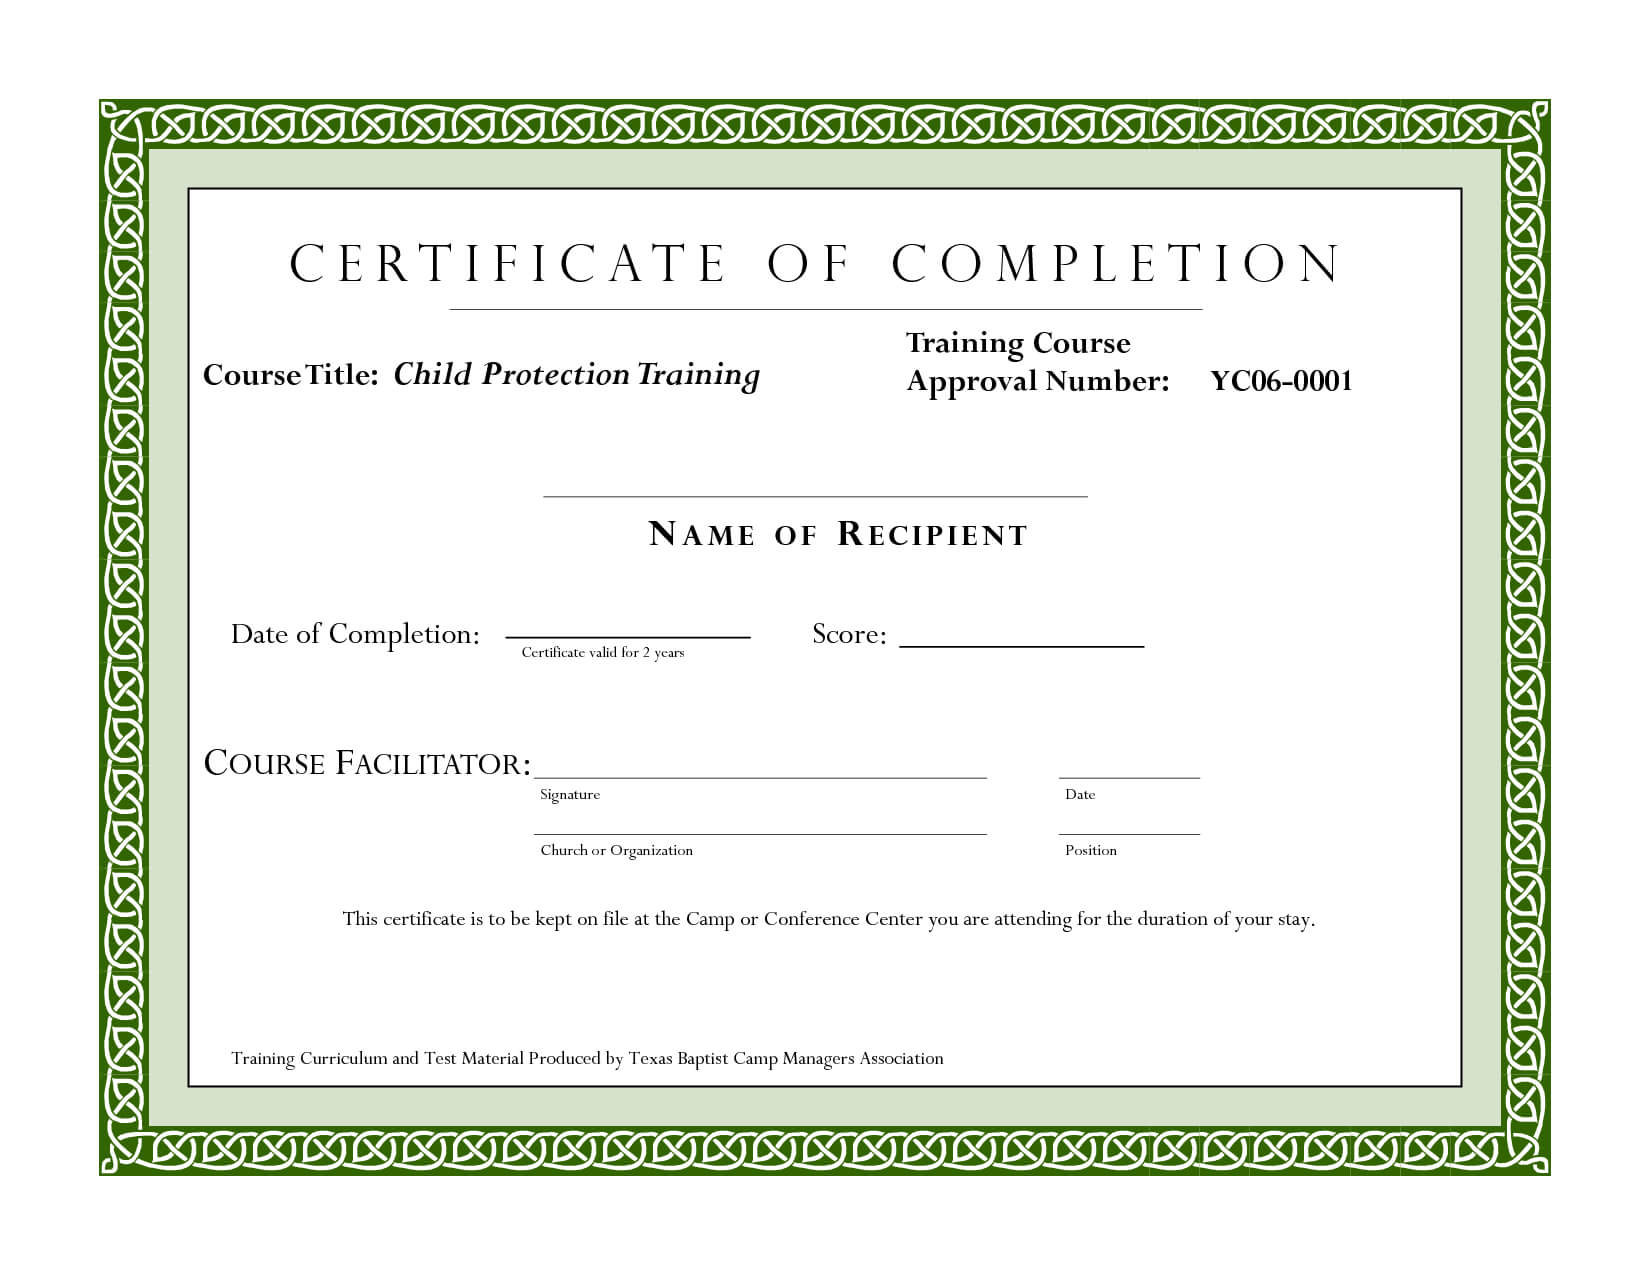 Course Completion Certificate Template | Certificate Of With Free Training Completion Certificate Templates